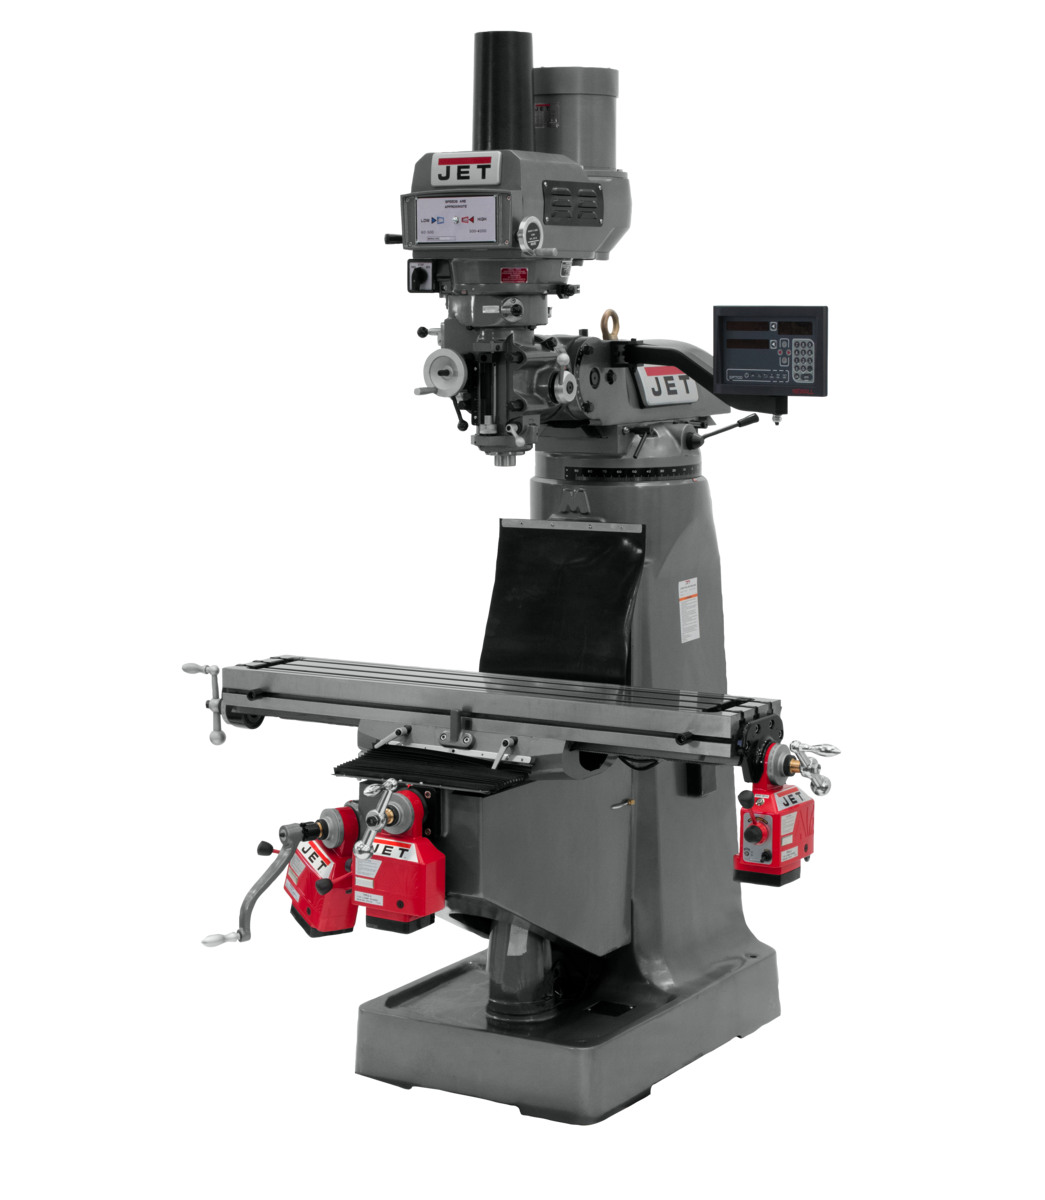 JTM-4VS-1 Mill With 3-Axis Newall DP700 DRO (Quill) With X, Y and Z-Axis Powerfeeds and Power Draw Bar